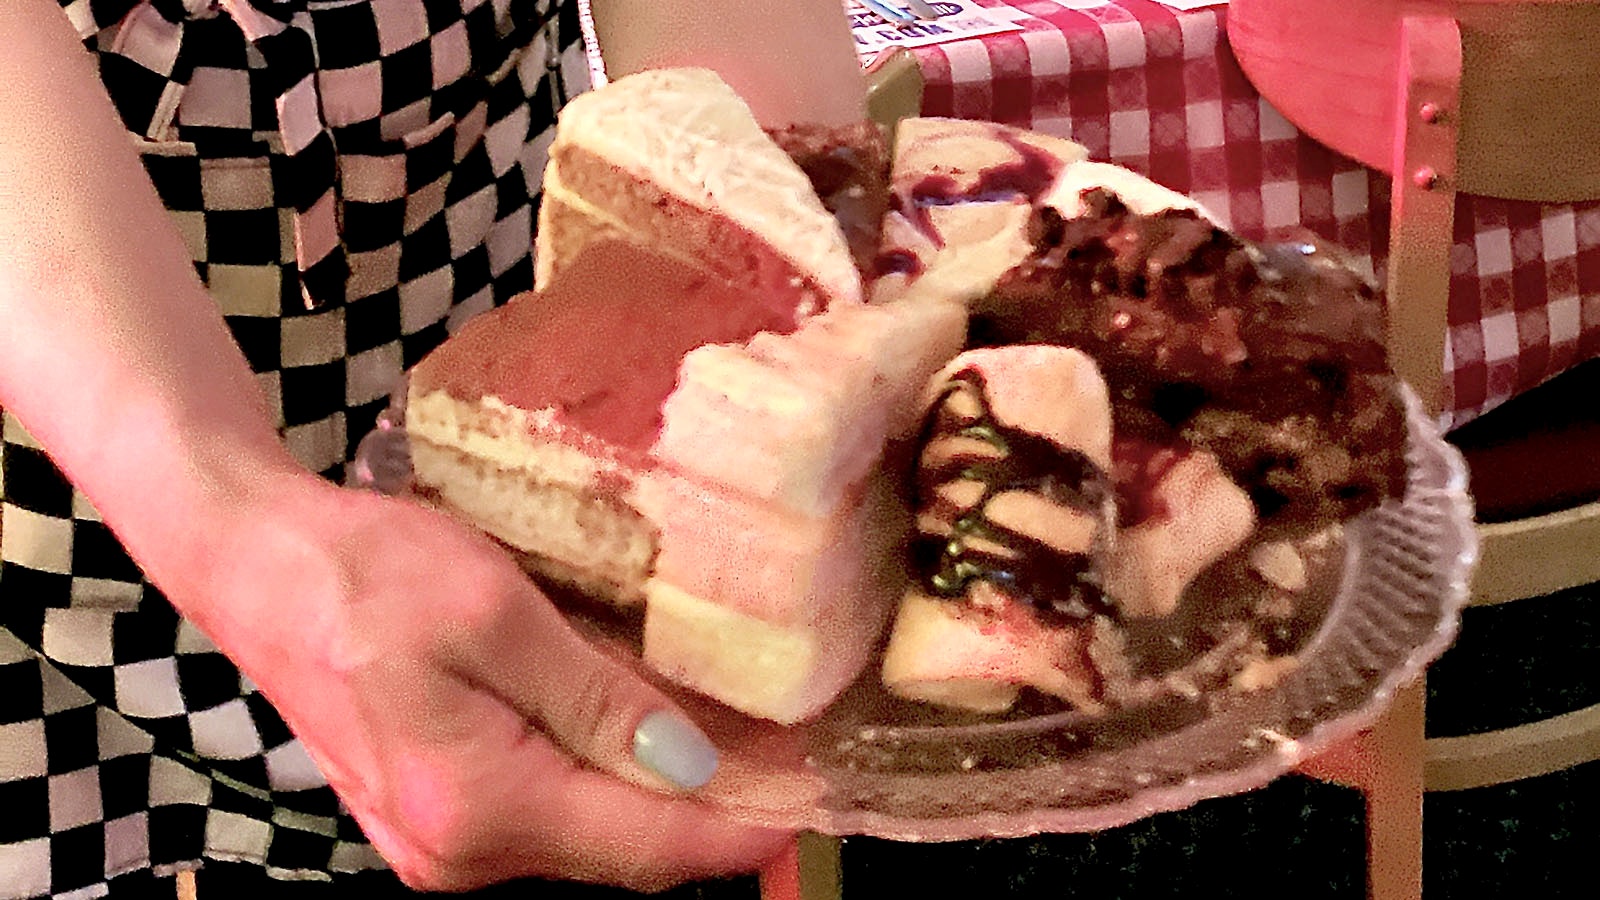 A server presents a tray of desserts.